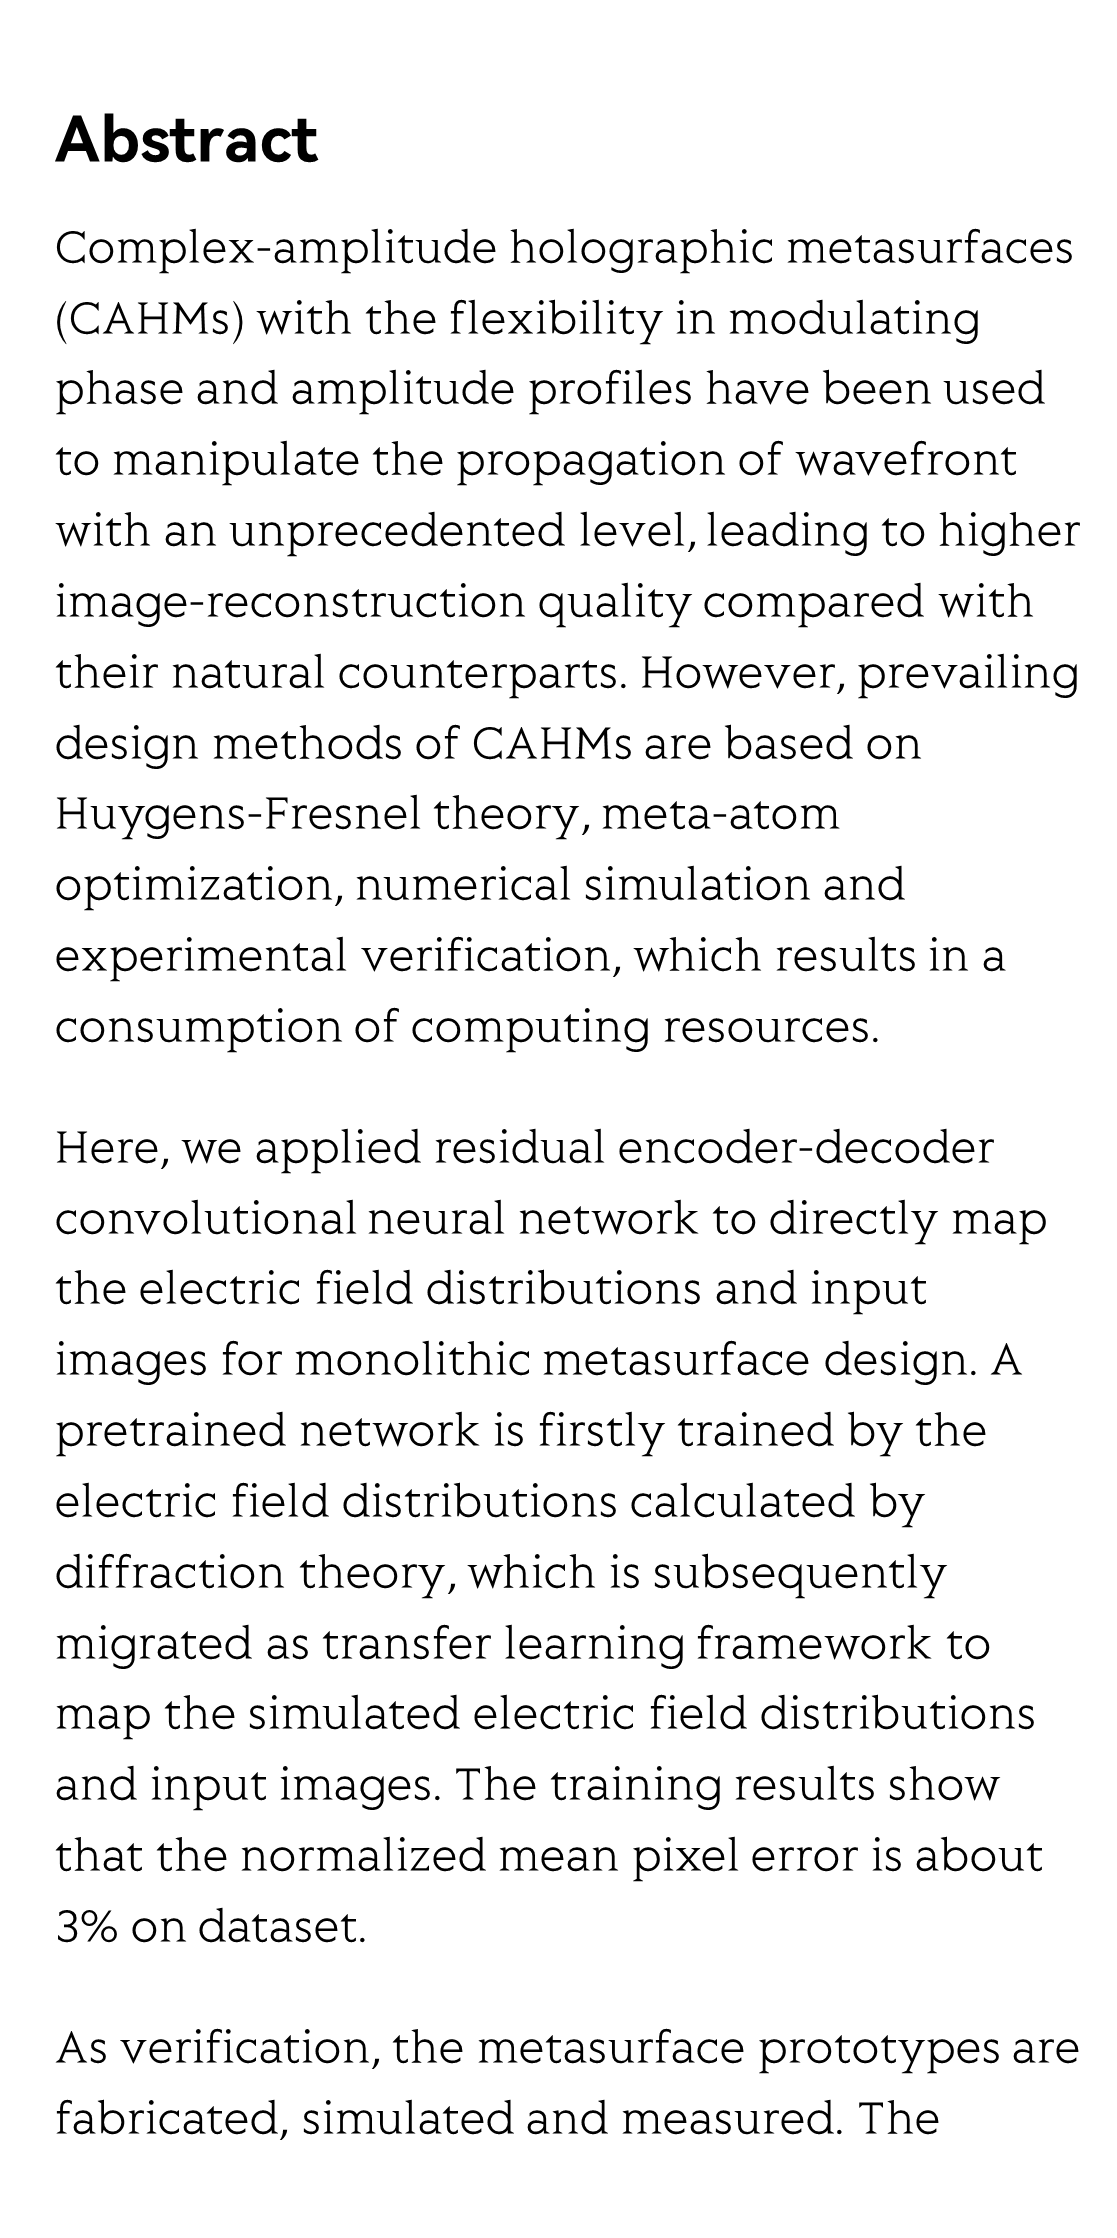 Direct field-to-pattern monolithic design of holographic metasurface via residual encoder-decoder convolutional neural network_2